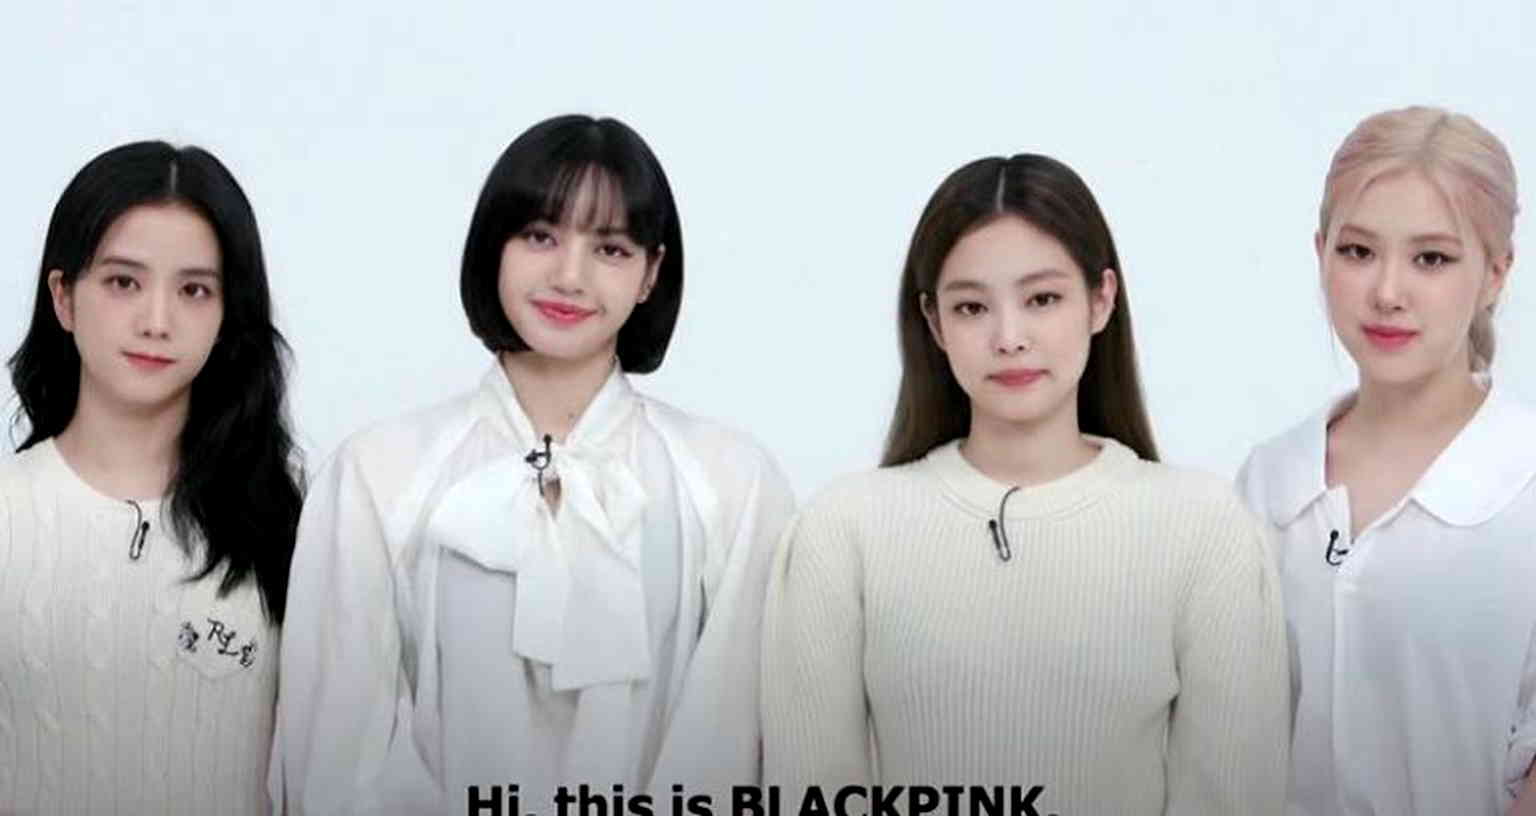 K-pop group BLACKPINK are the first Asian artists ever to be named SDG advocates by UN